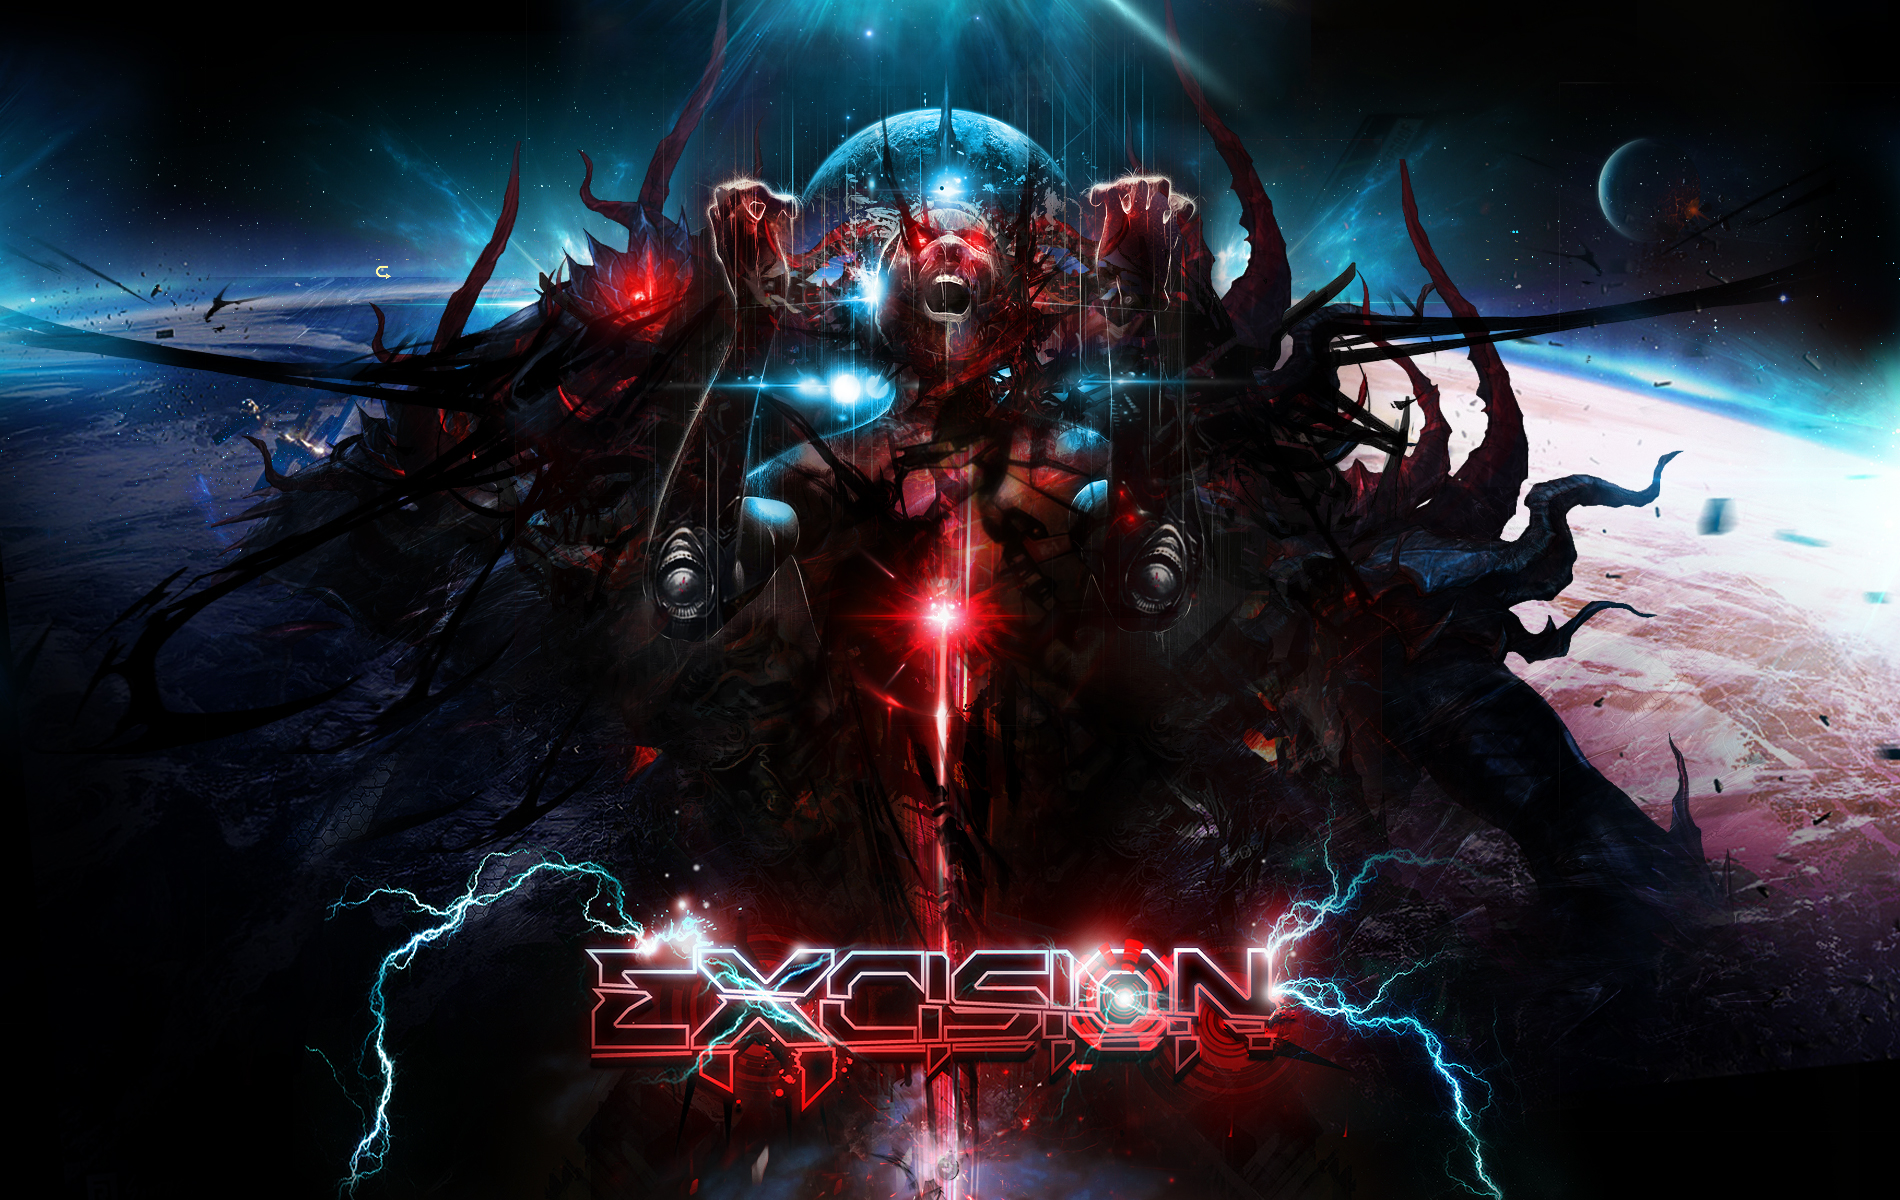 Excision #3